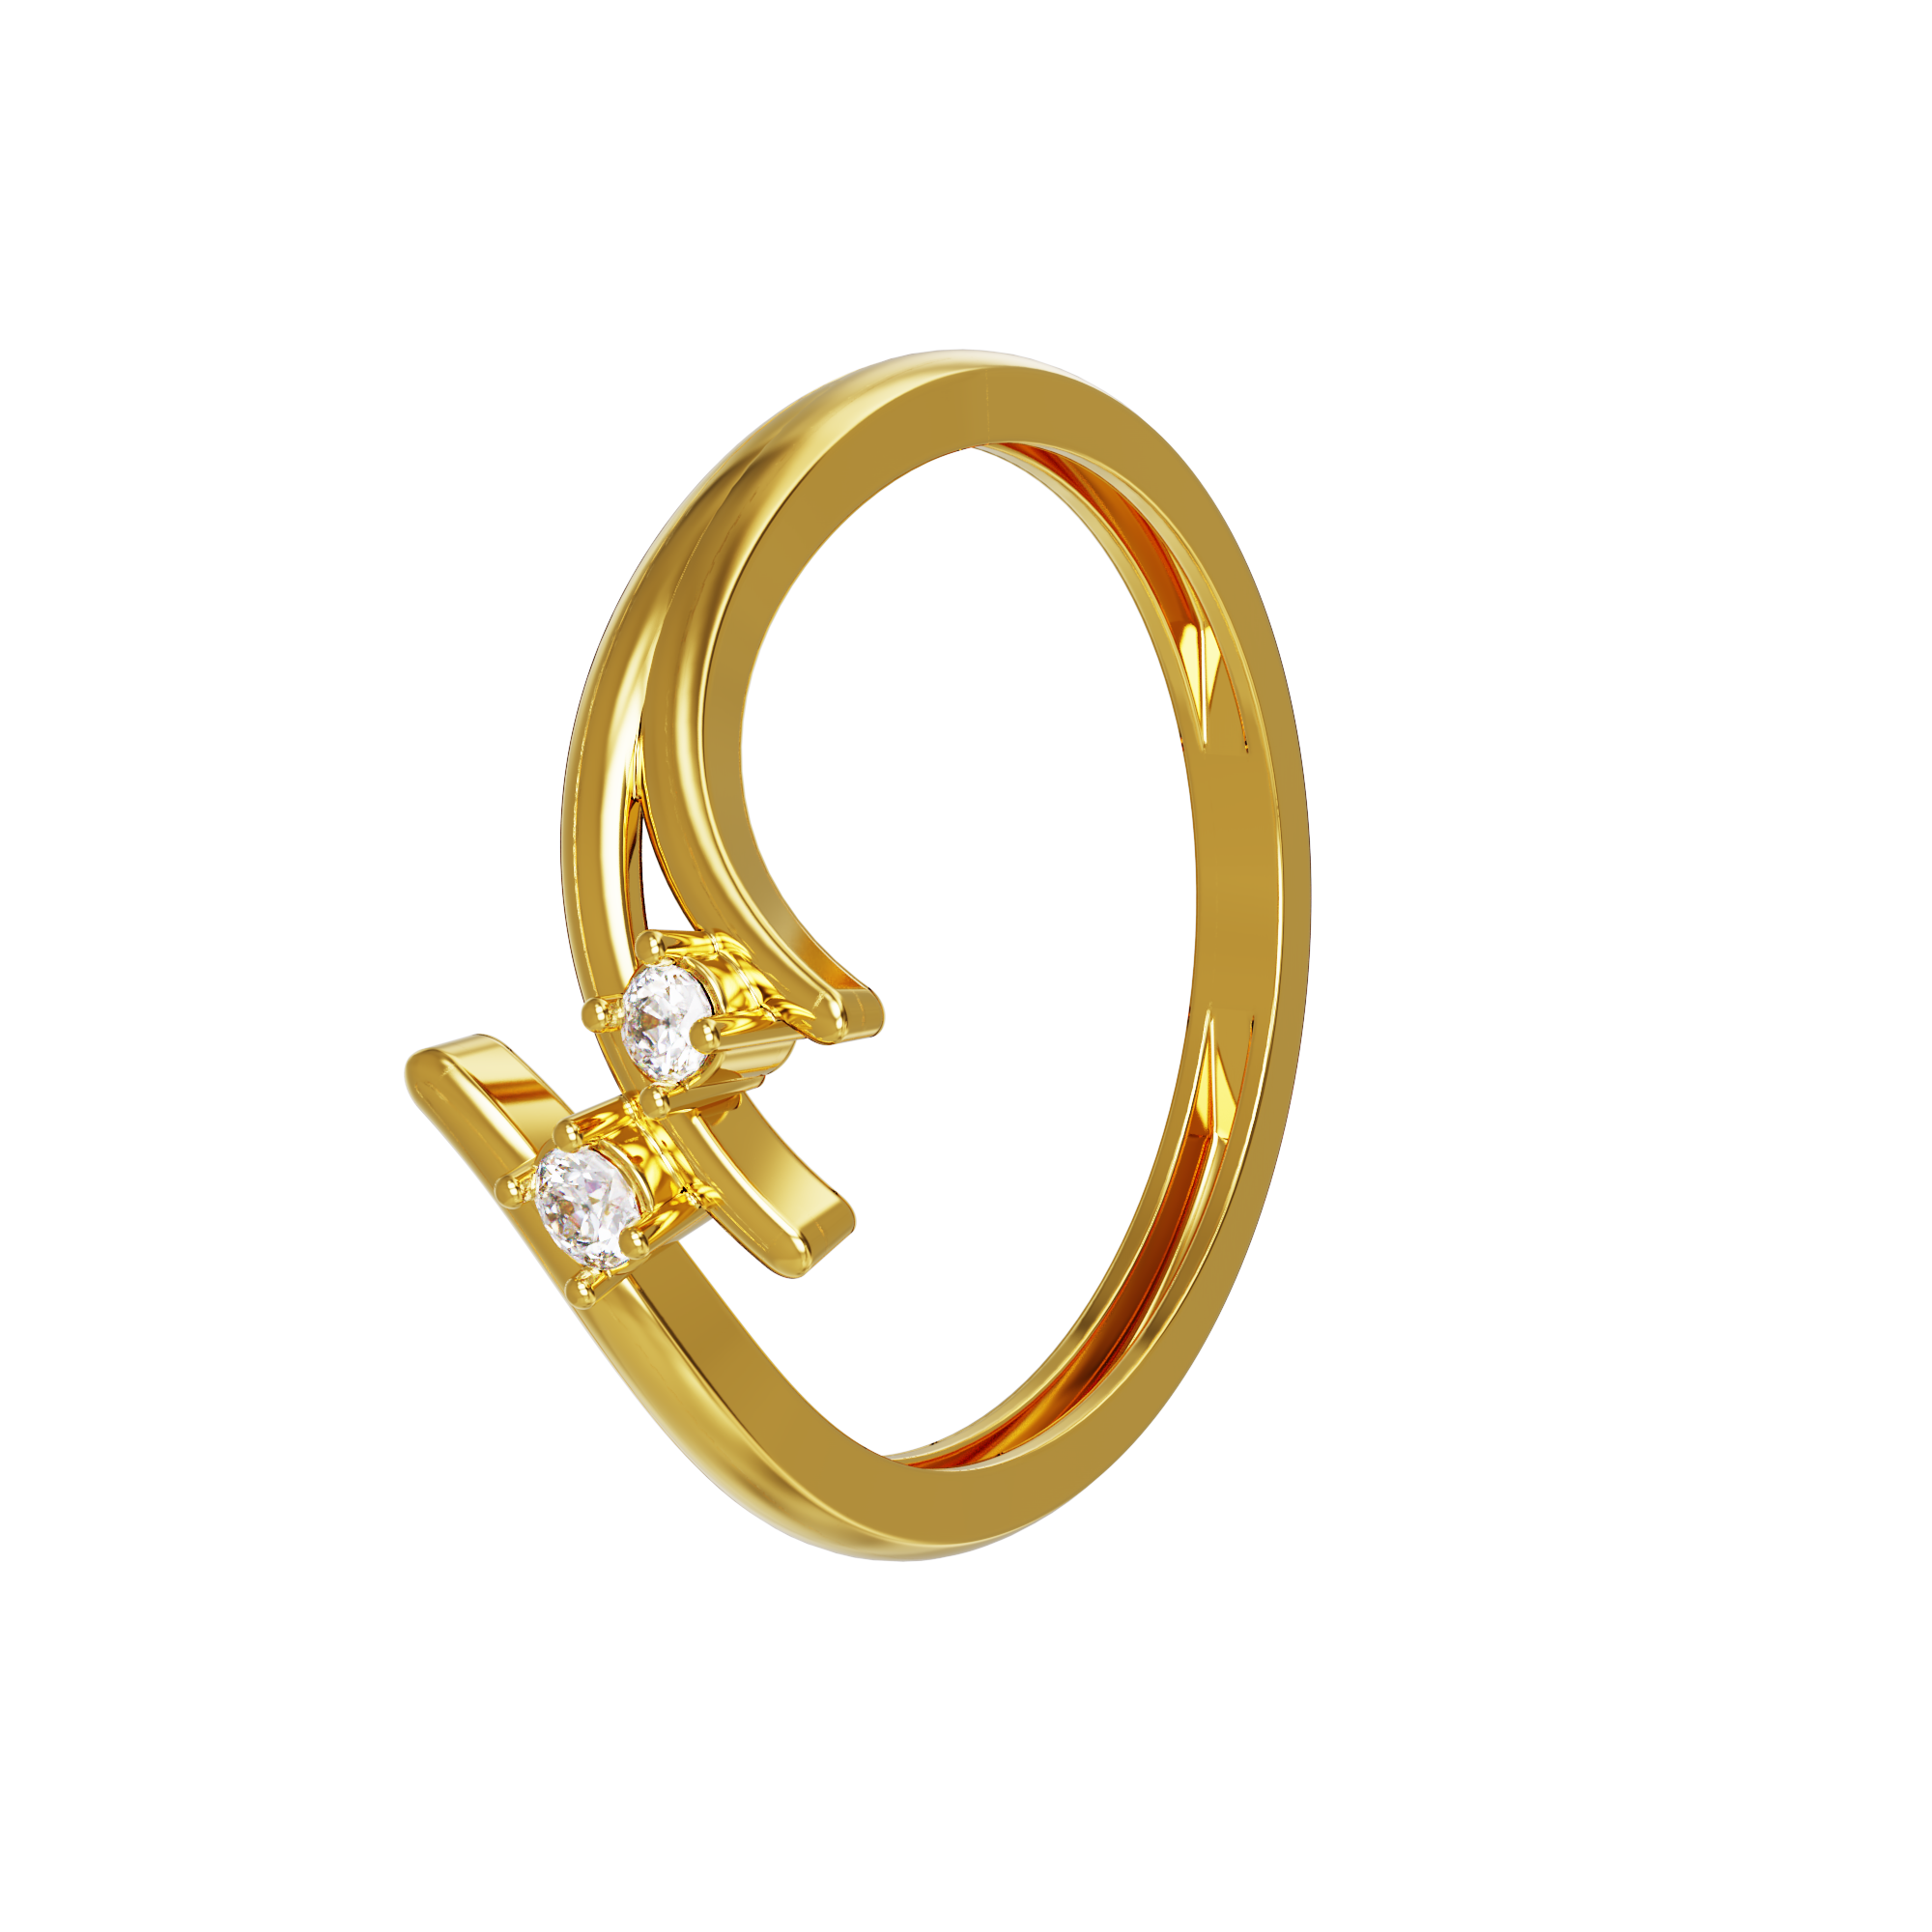 Modern-Gold-Ring-with-Stone-Design